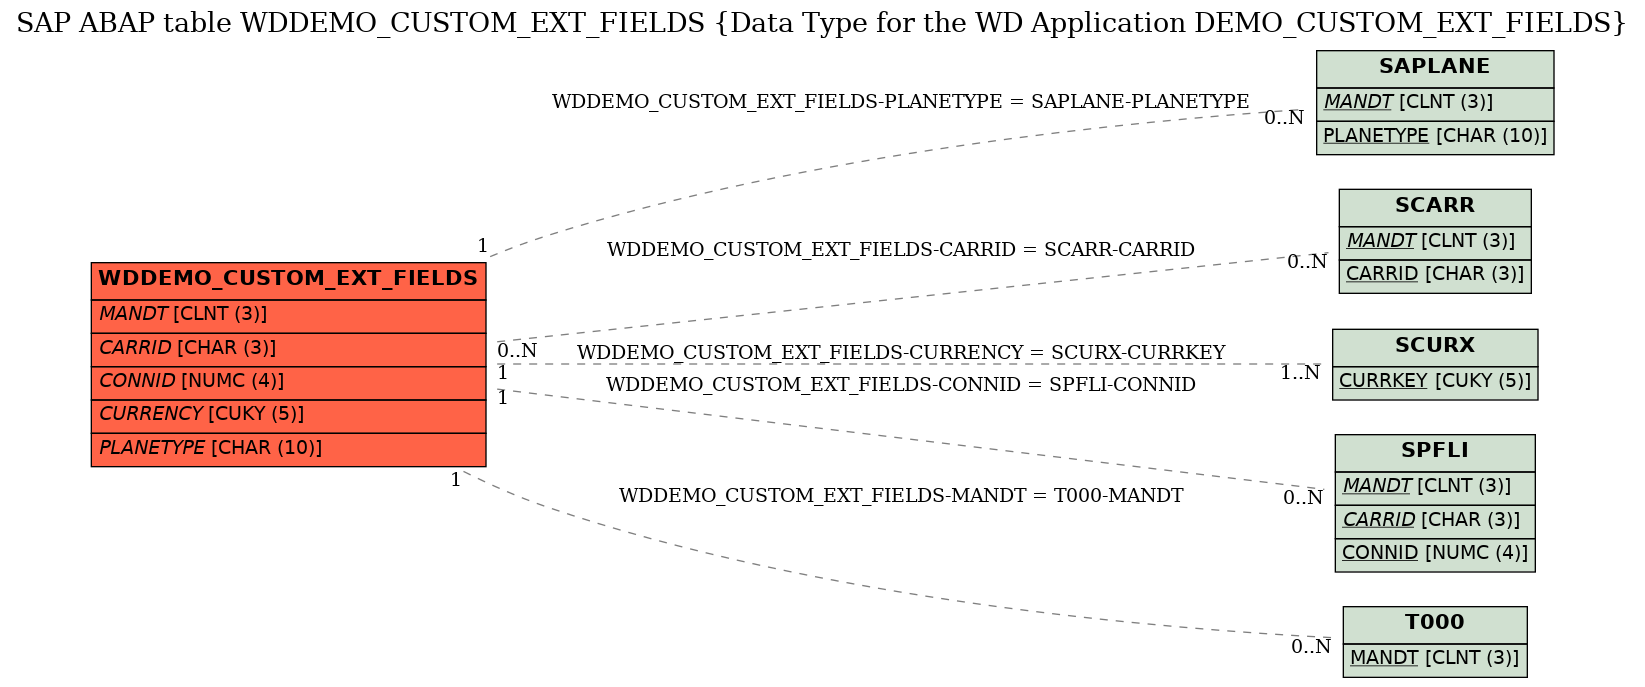 E-R Diagram for table WDDEMO_CUSTOM_EXT_FIELDS (Data Type for the WD Application DEMO_CUSTOM_EXT_FIELDS)